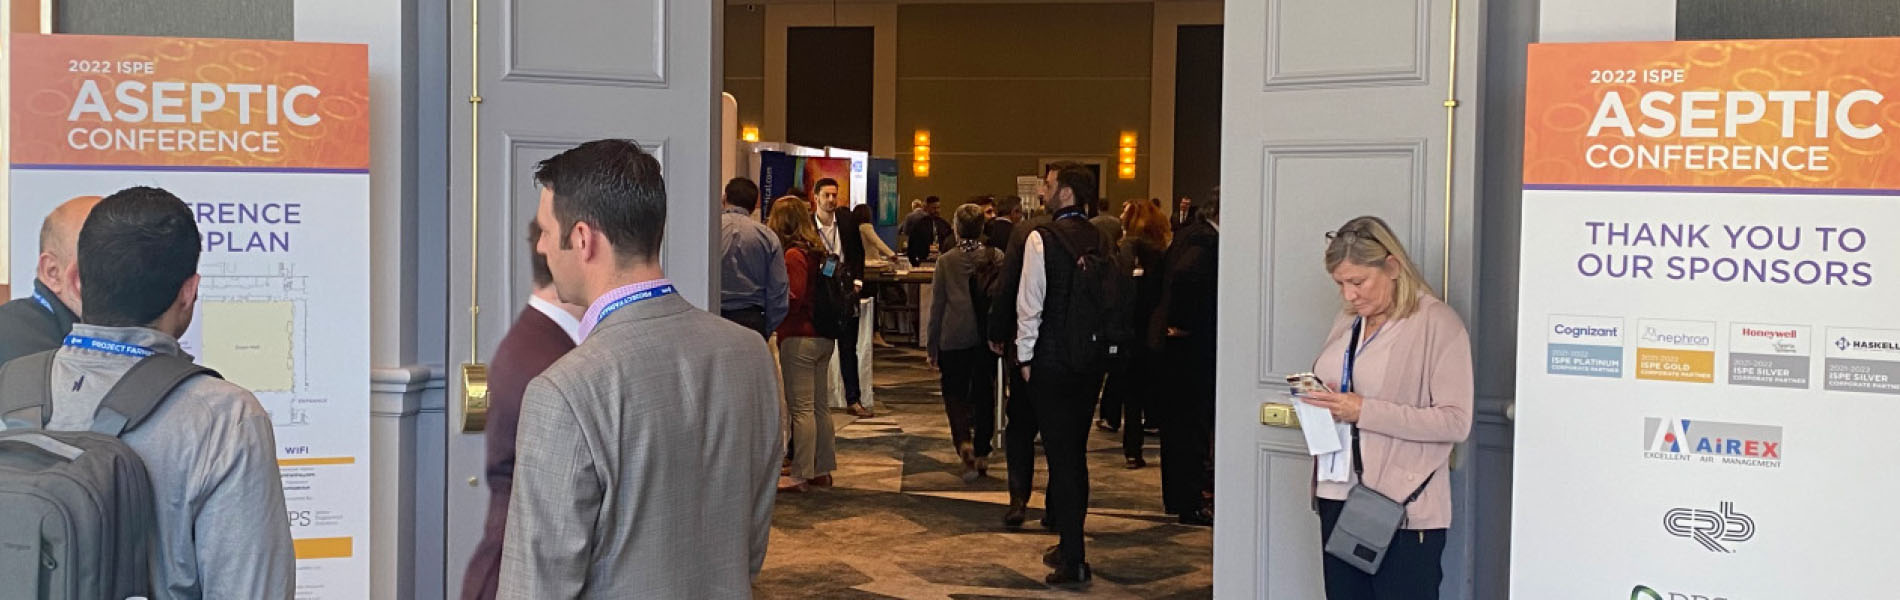 Figures 1 and 2: Attendees and a presenter at the 2022 ISPE Aseptic Conference, which the SPP CoP participates in developing.